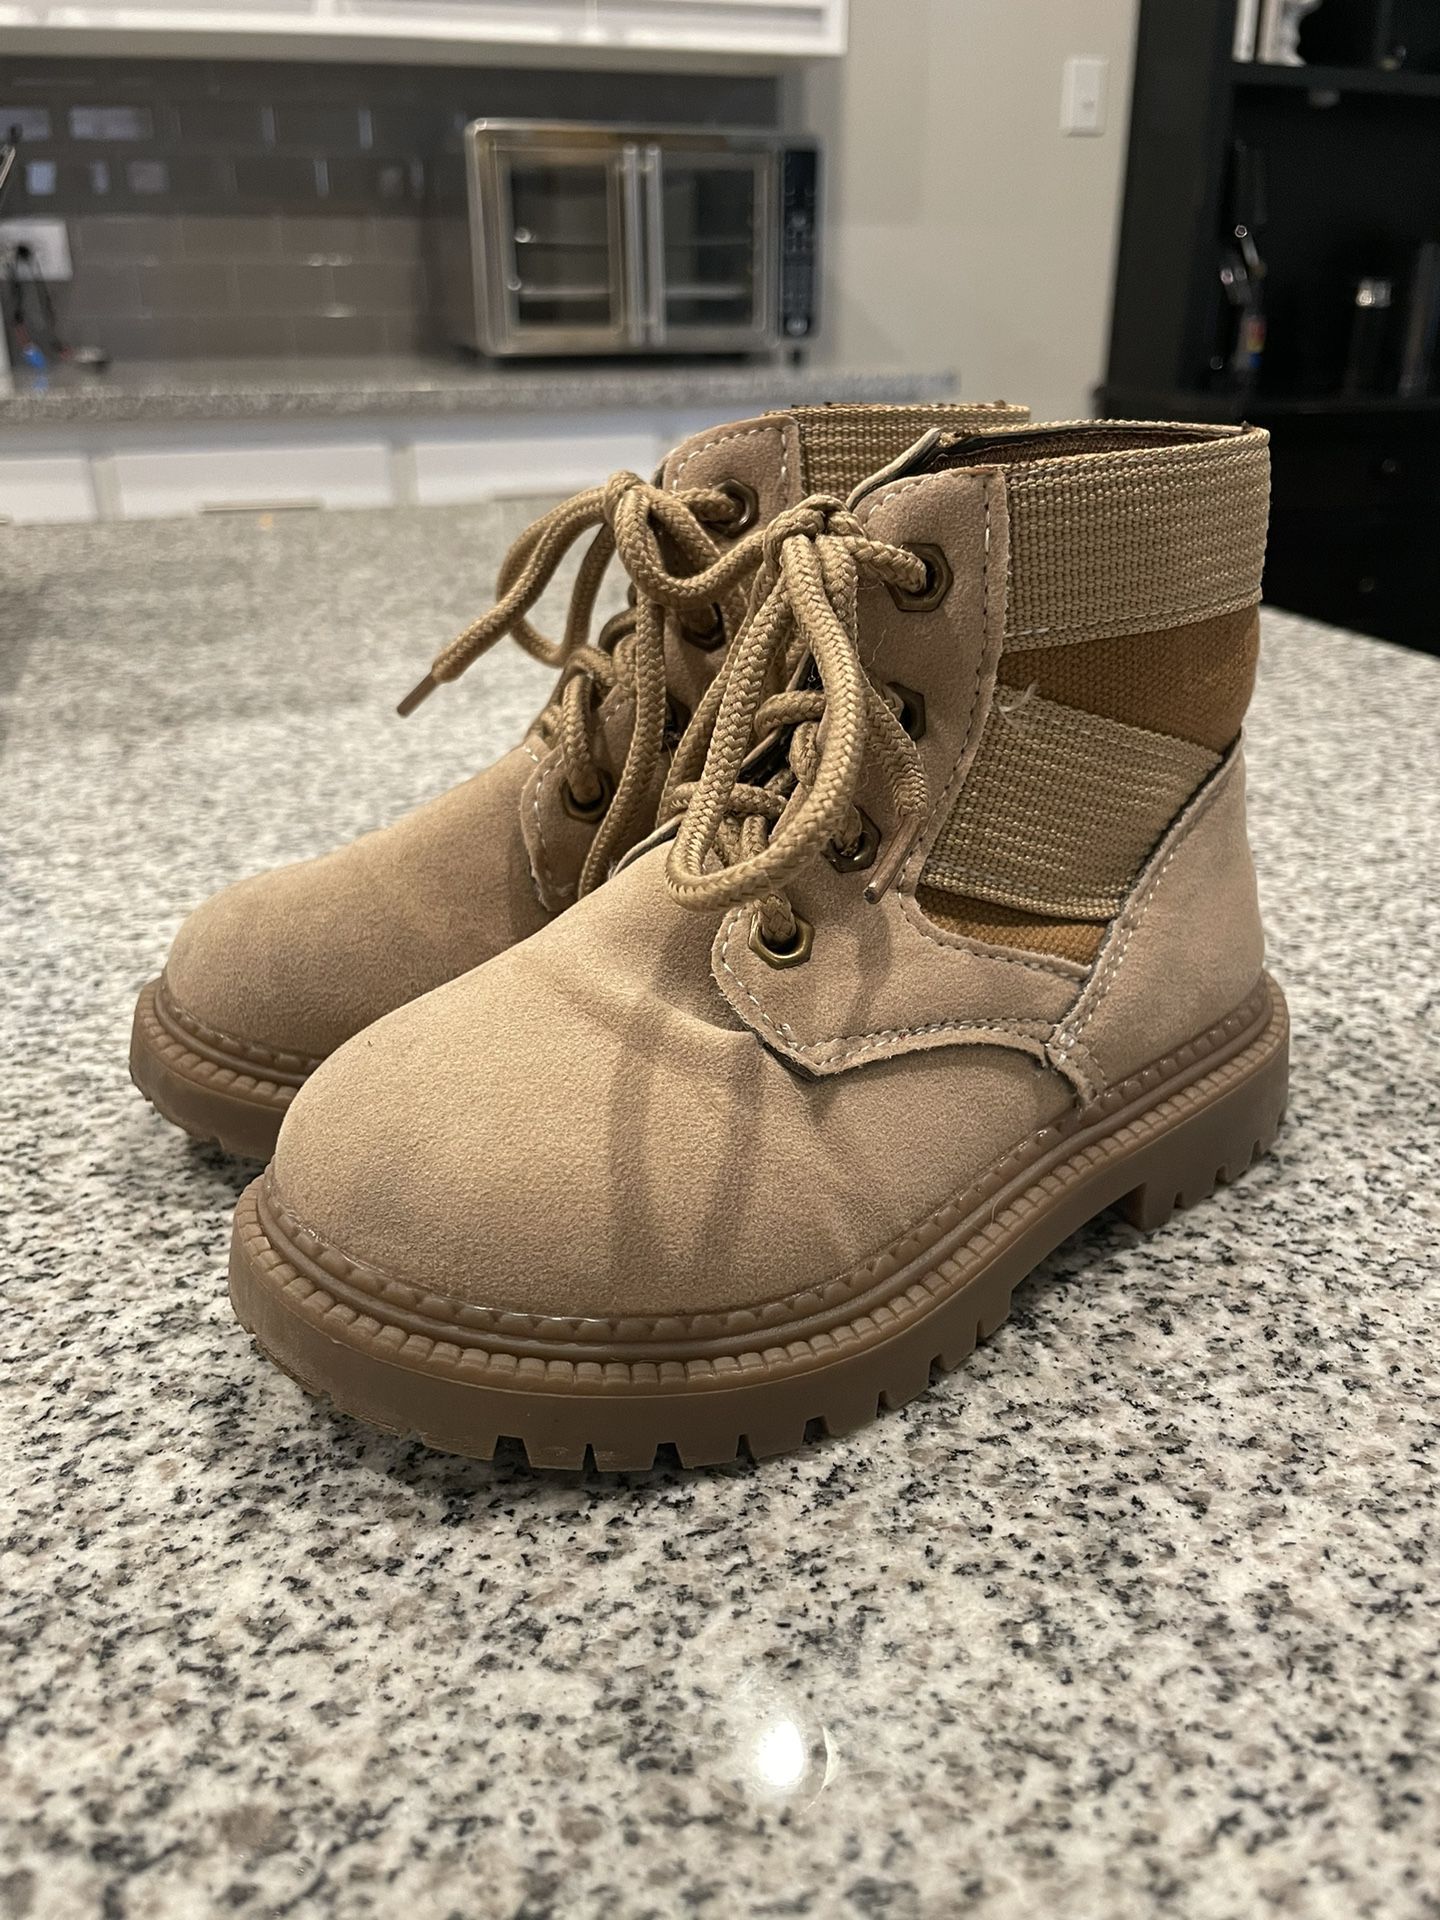 Toddler Size 9 Combat Boots / Work Boots